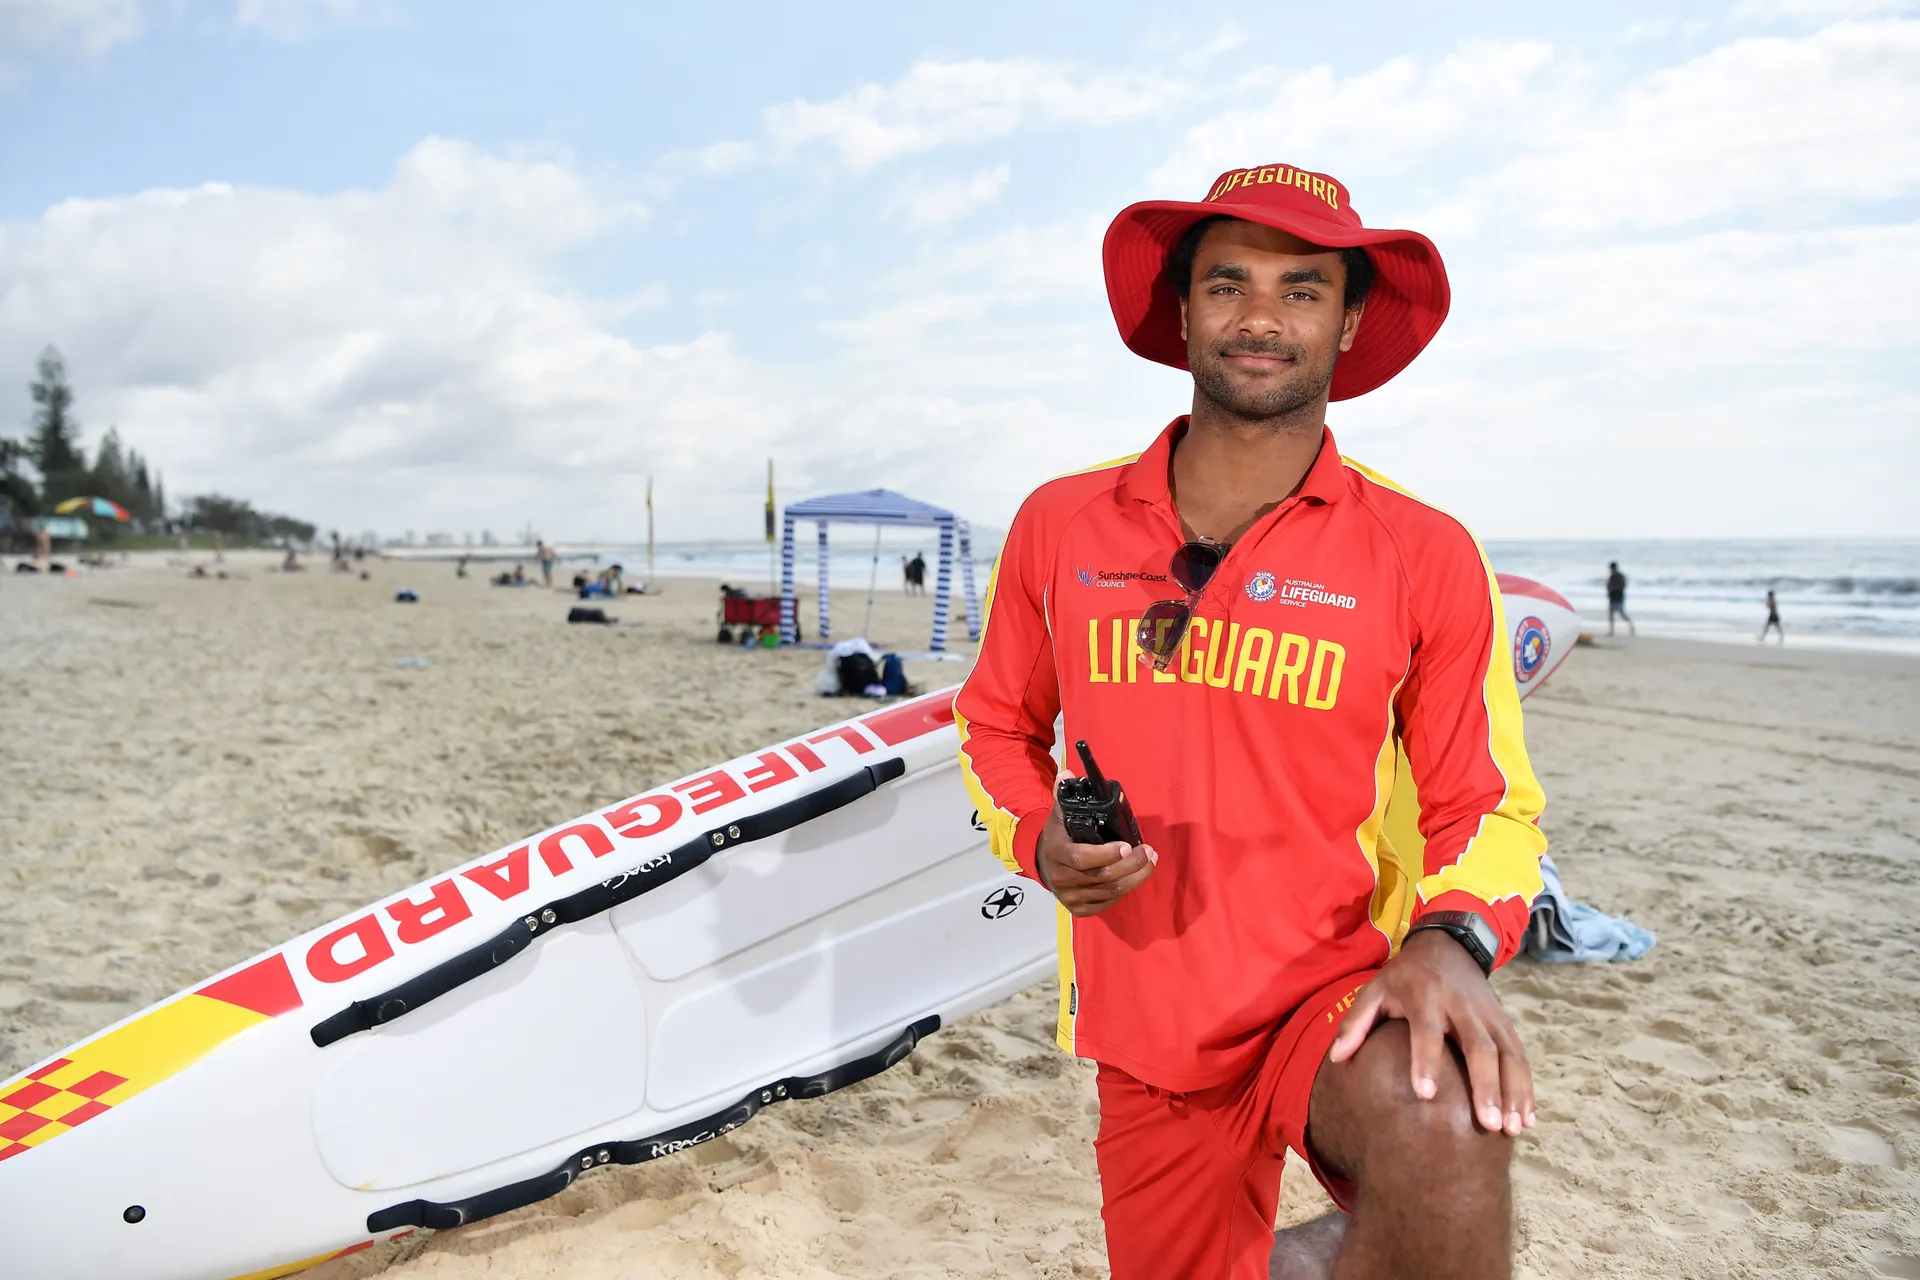 
Professional Lifeguard Steven Coombes will be helping protect visitors to our beaches this summer.
